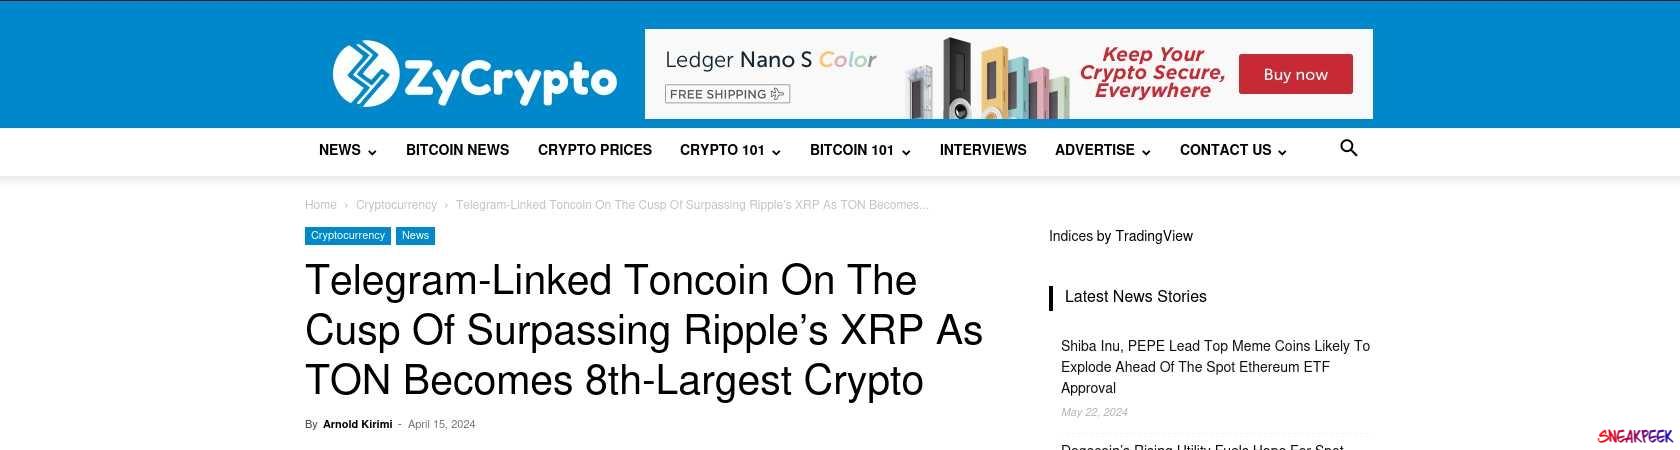 Read the full Article:  ⭲ Telegram-Linked Toncoin On The Cusp Of Surpassing Ripple’s XRP As TON Becomes 8th-Largest Crypto